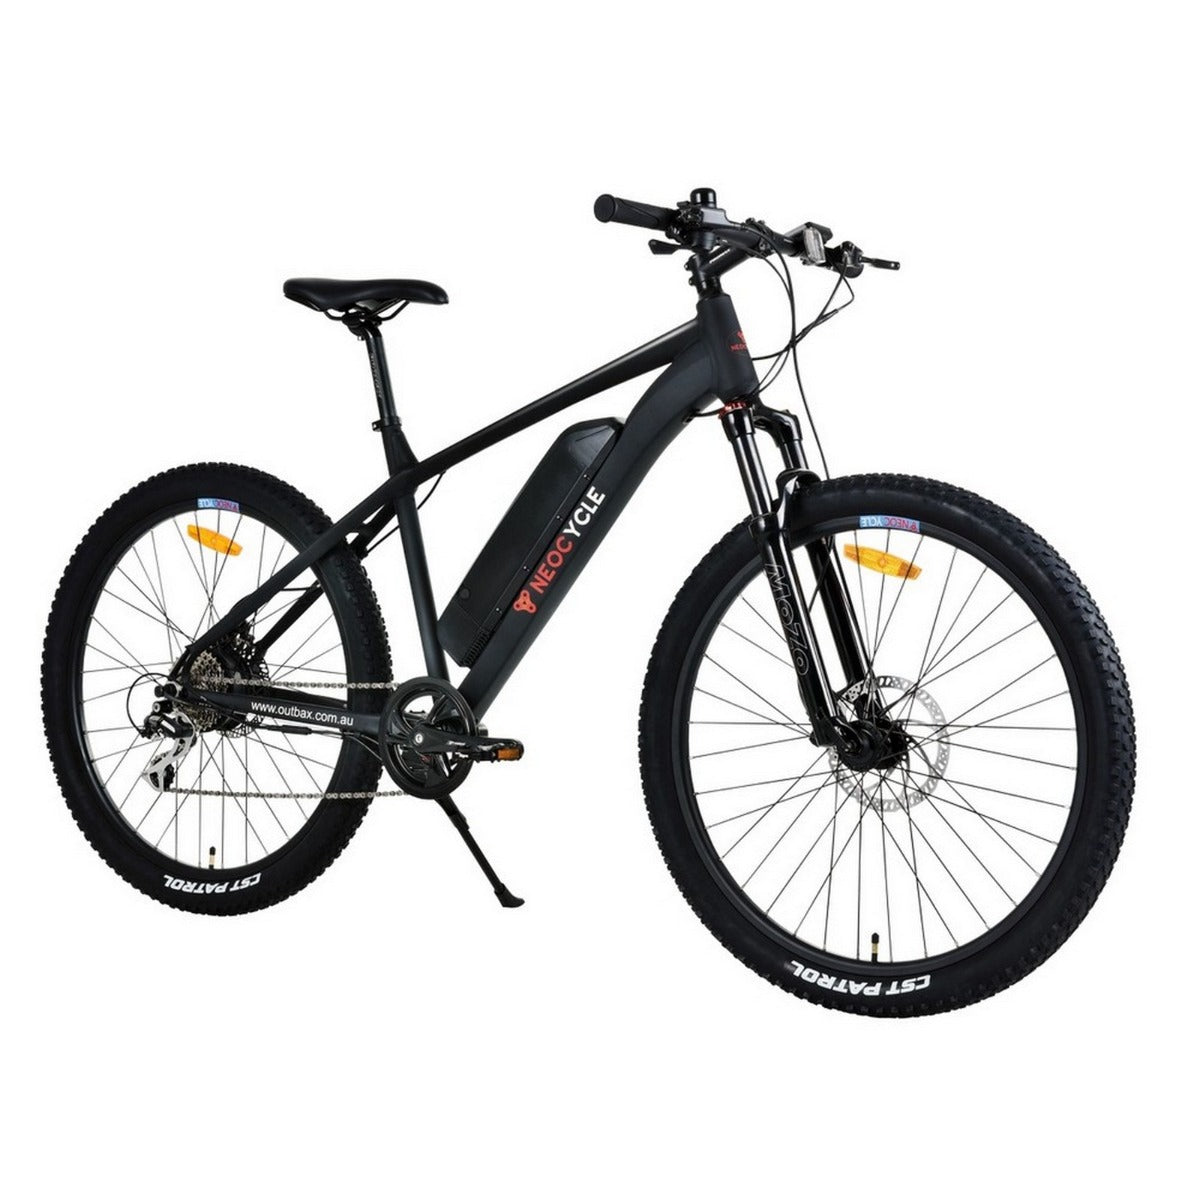 NEOCYCLE Mountain Bike - 36V LARGE Electric Bicycle 10Ah Lithium Battery - Black